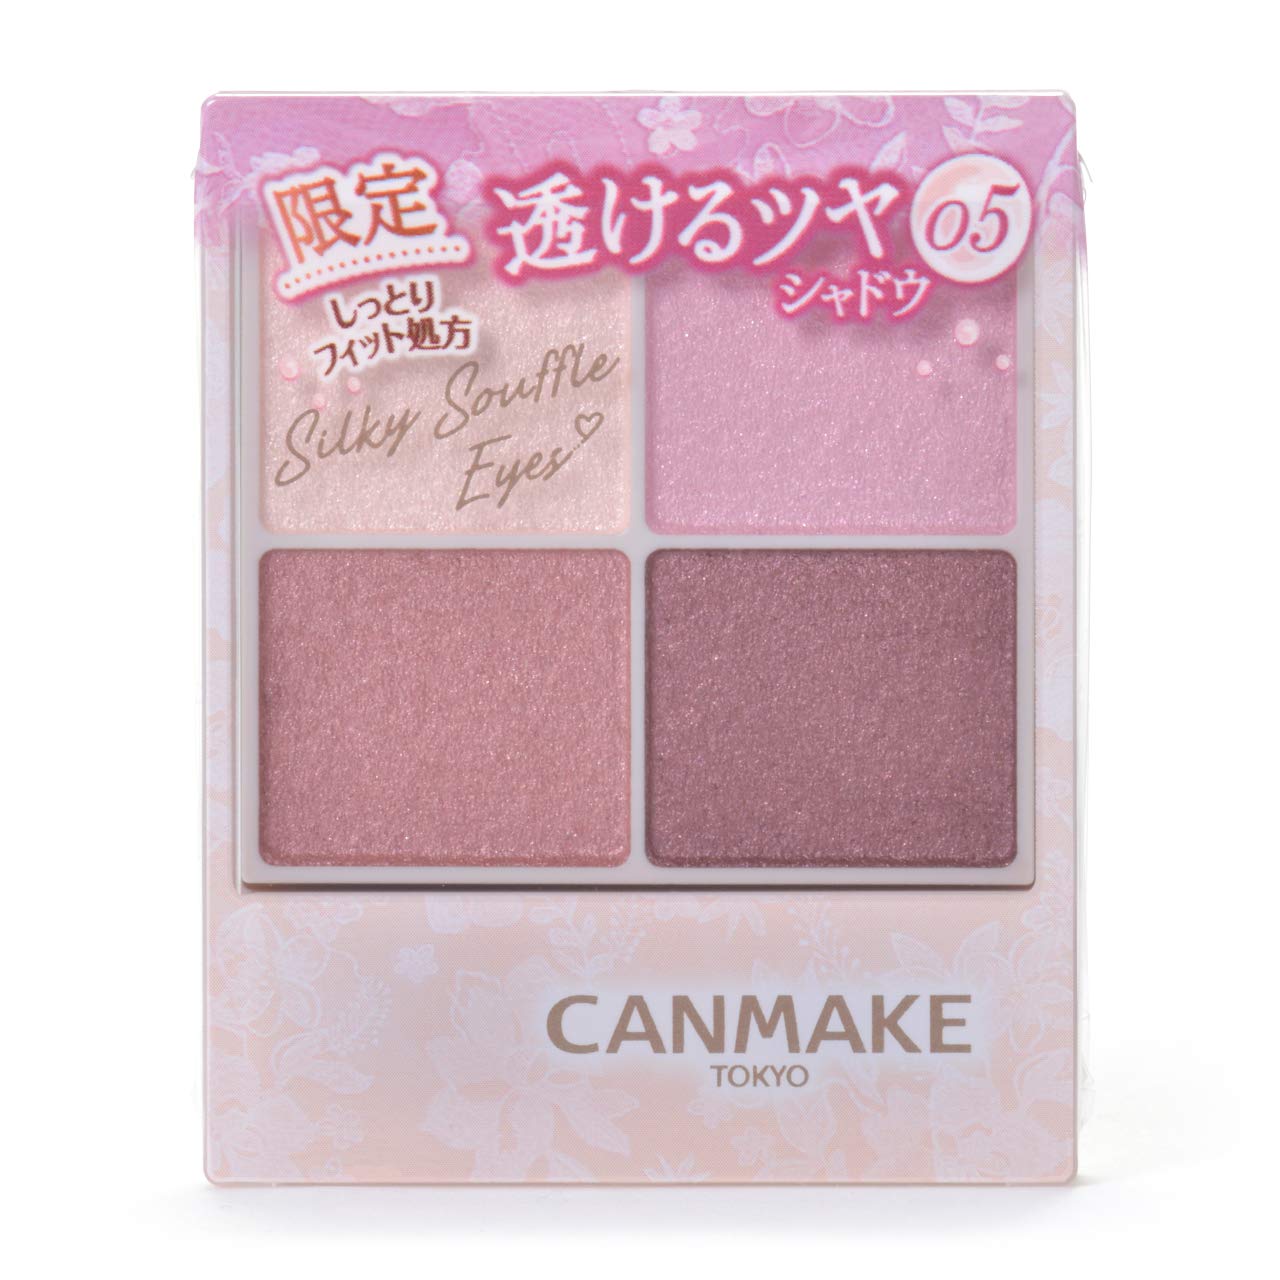 Canmake Silky Flare Eyes 05 - 1 Piece Lilac Mauve Eyeshadow